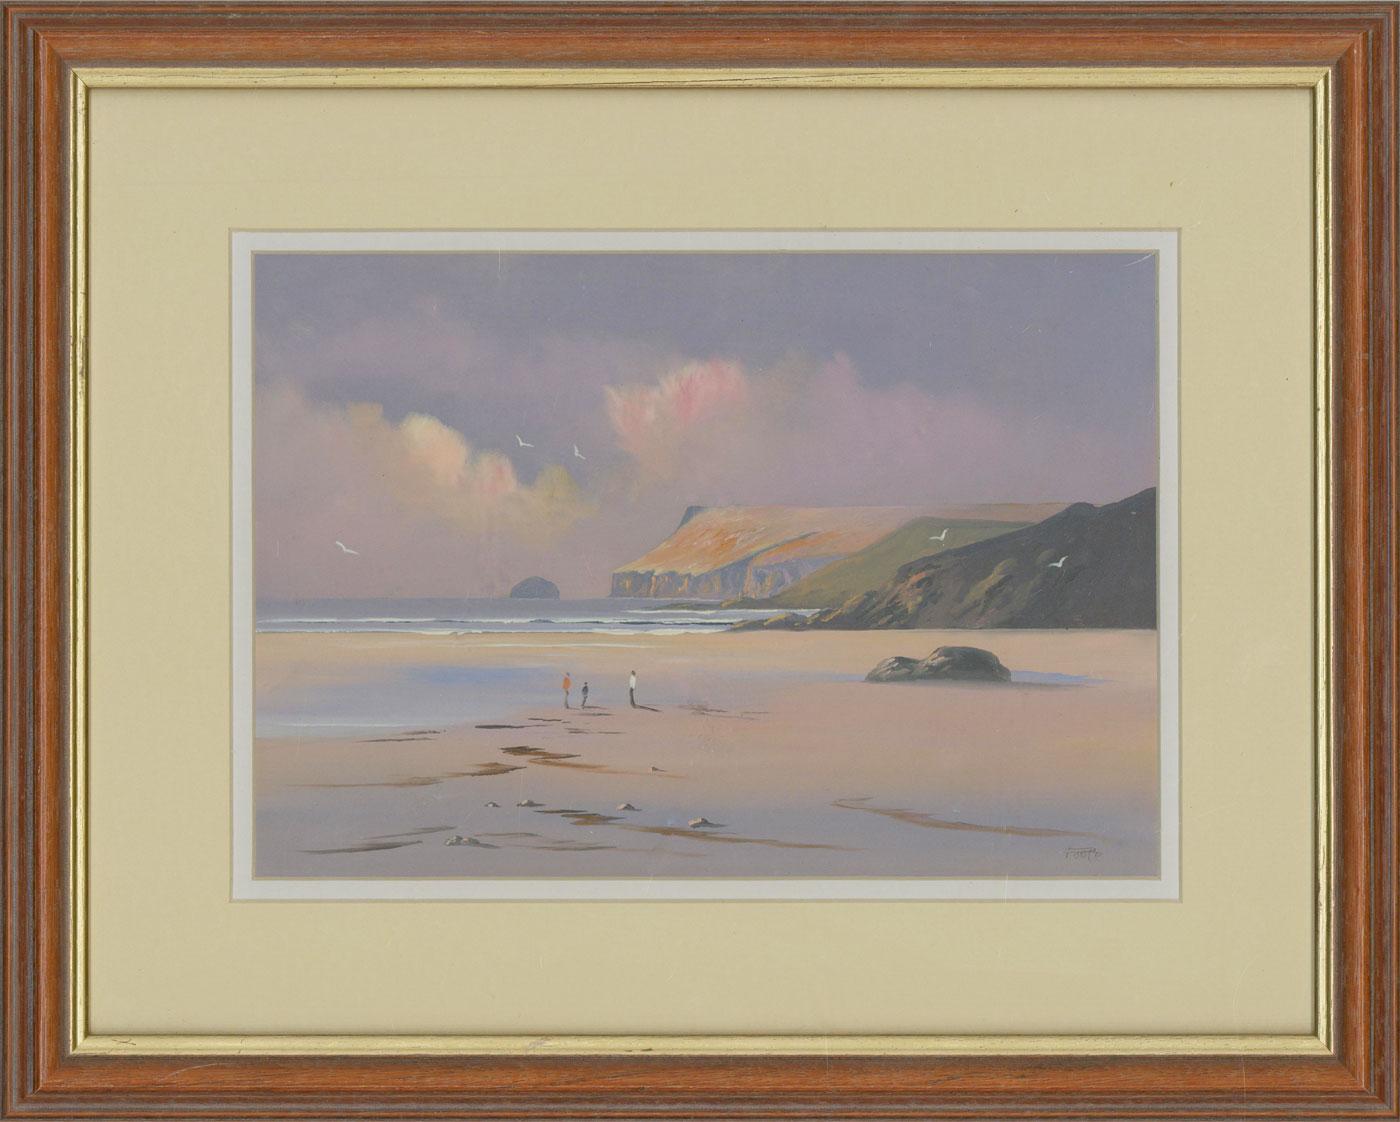 A highly decorative seascape view of Polzeath Beach in Cornwall. The vibrant colour palette and panoramic composition is reminiscent of vintage postcards produced throughout the 1950s. This vintage feel is typical of Poole's nostalgic style and